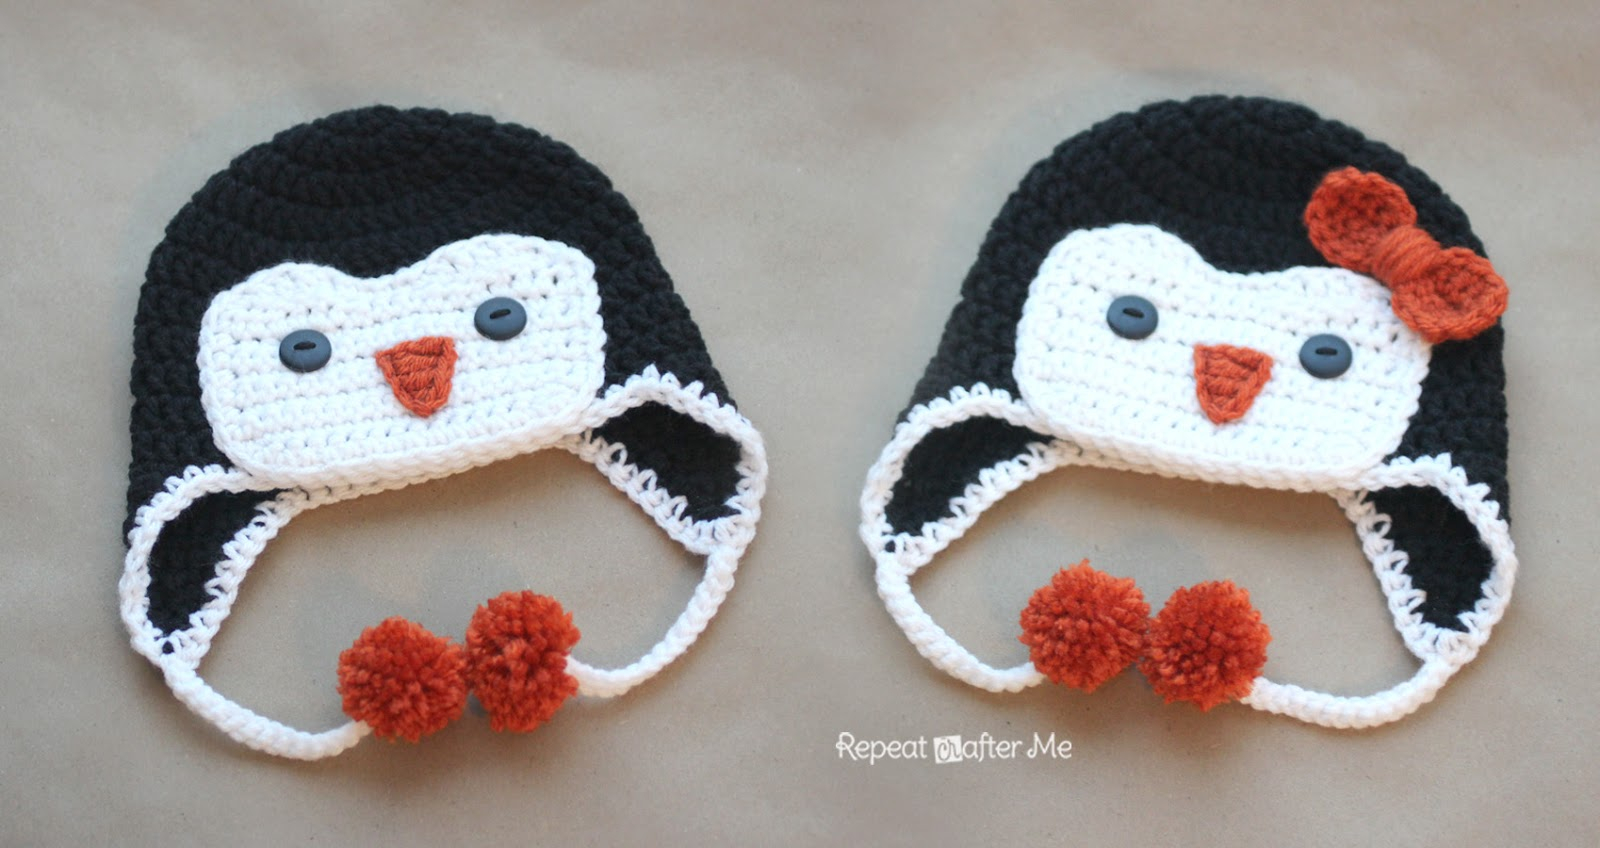 Repeat Crafter Me Crochet Owl Hat Pattern Crochet Penguin Hat Pattern Repeat Crafter Me